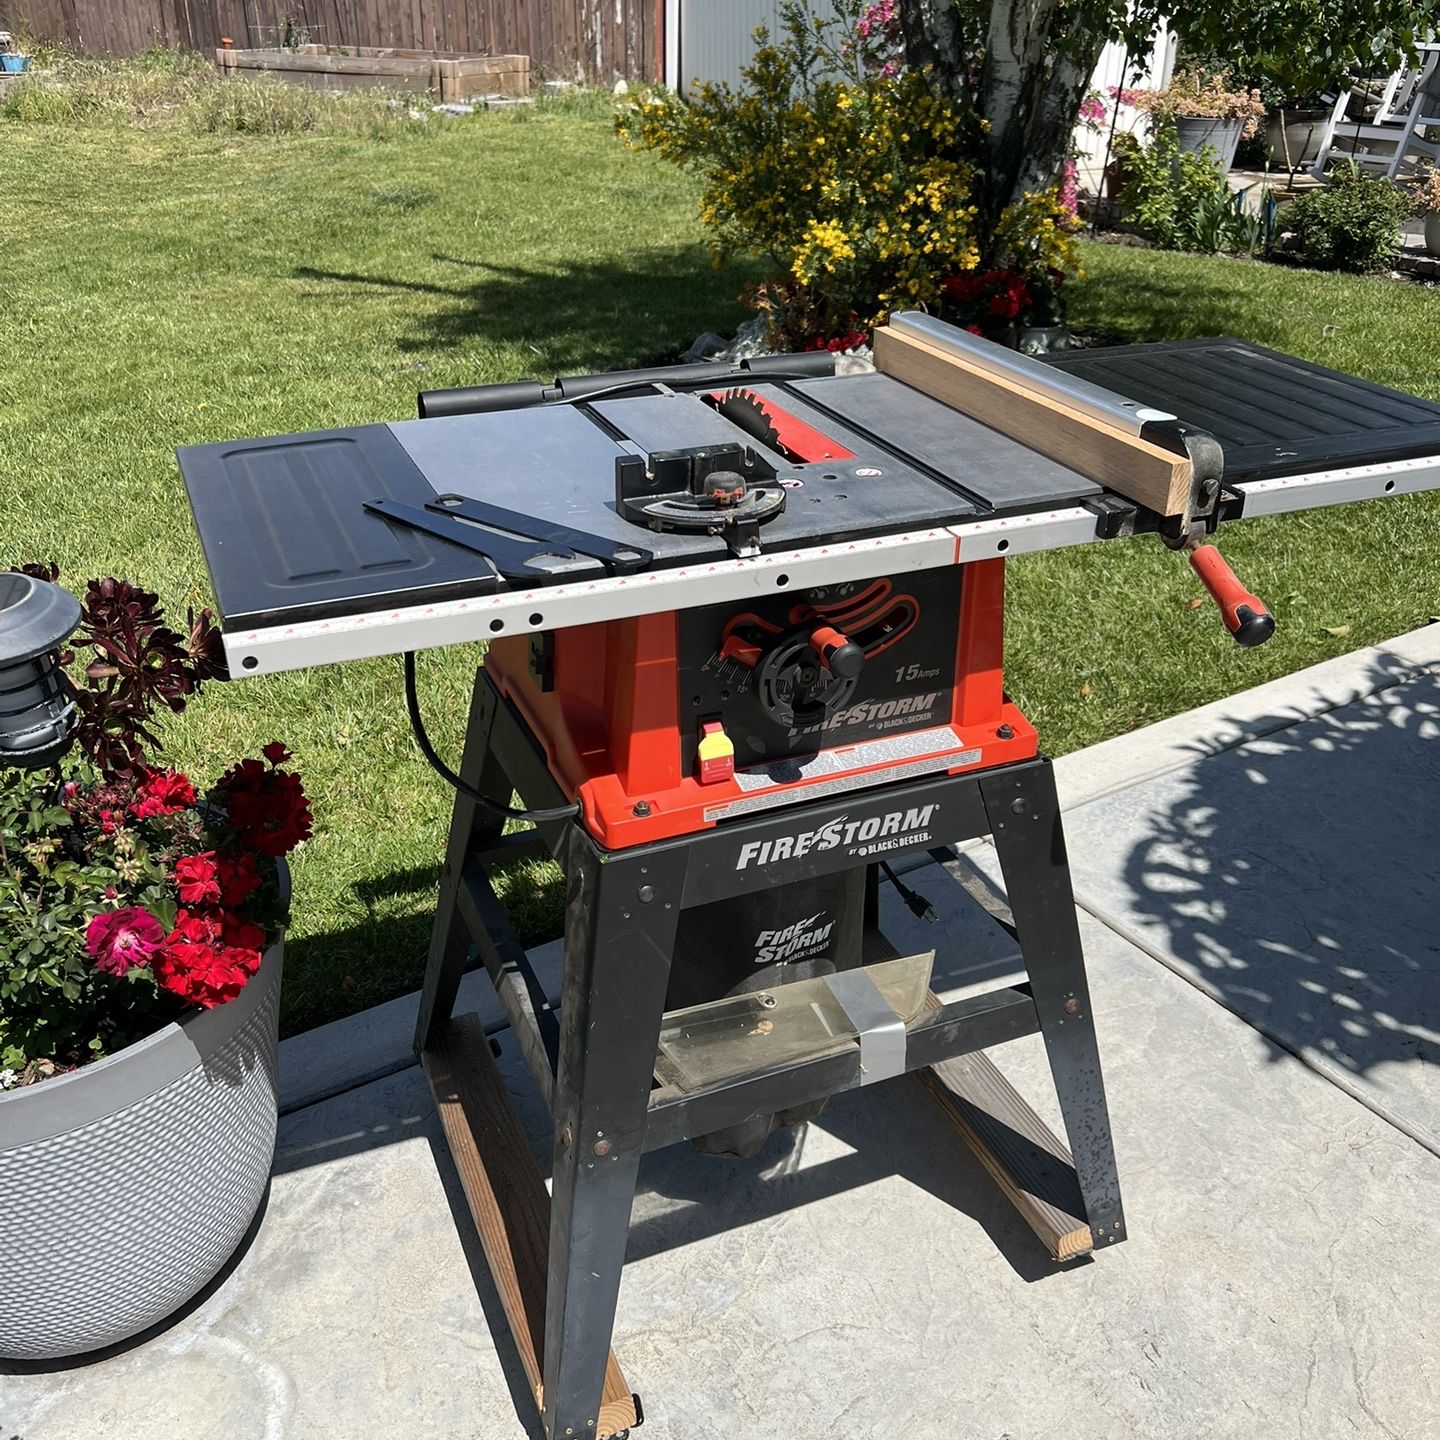 10 Inch Table Saw 